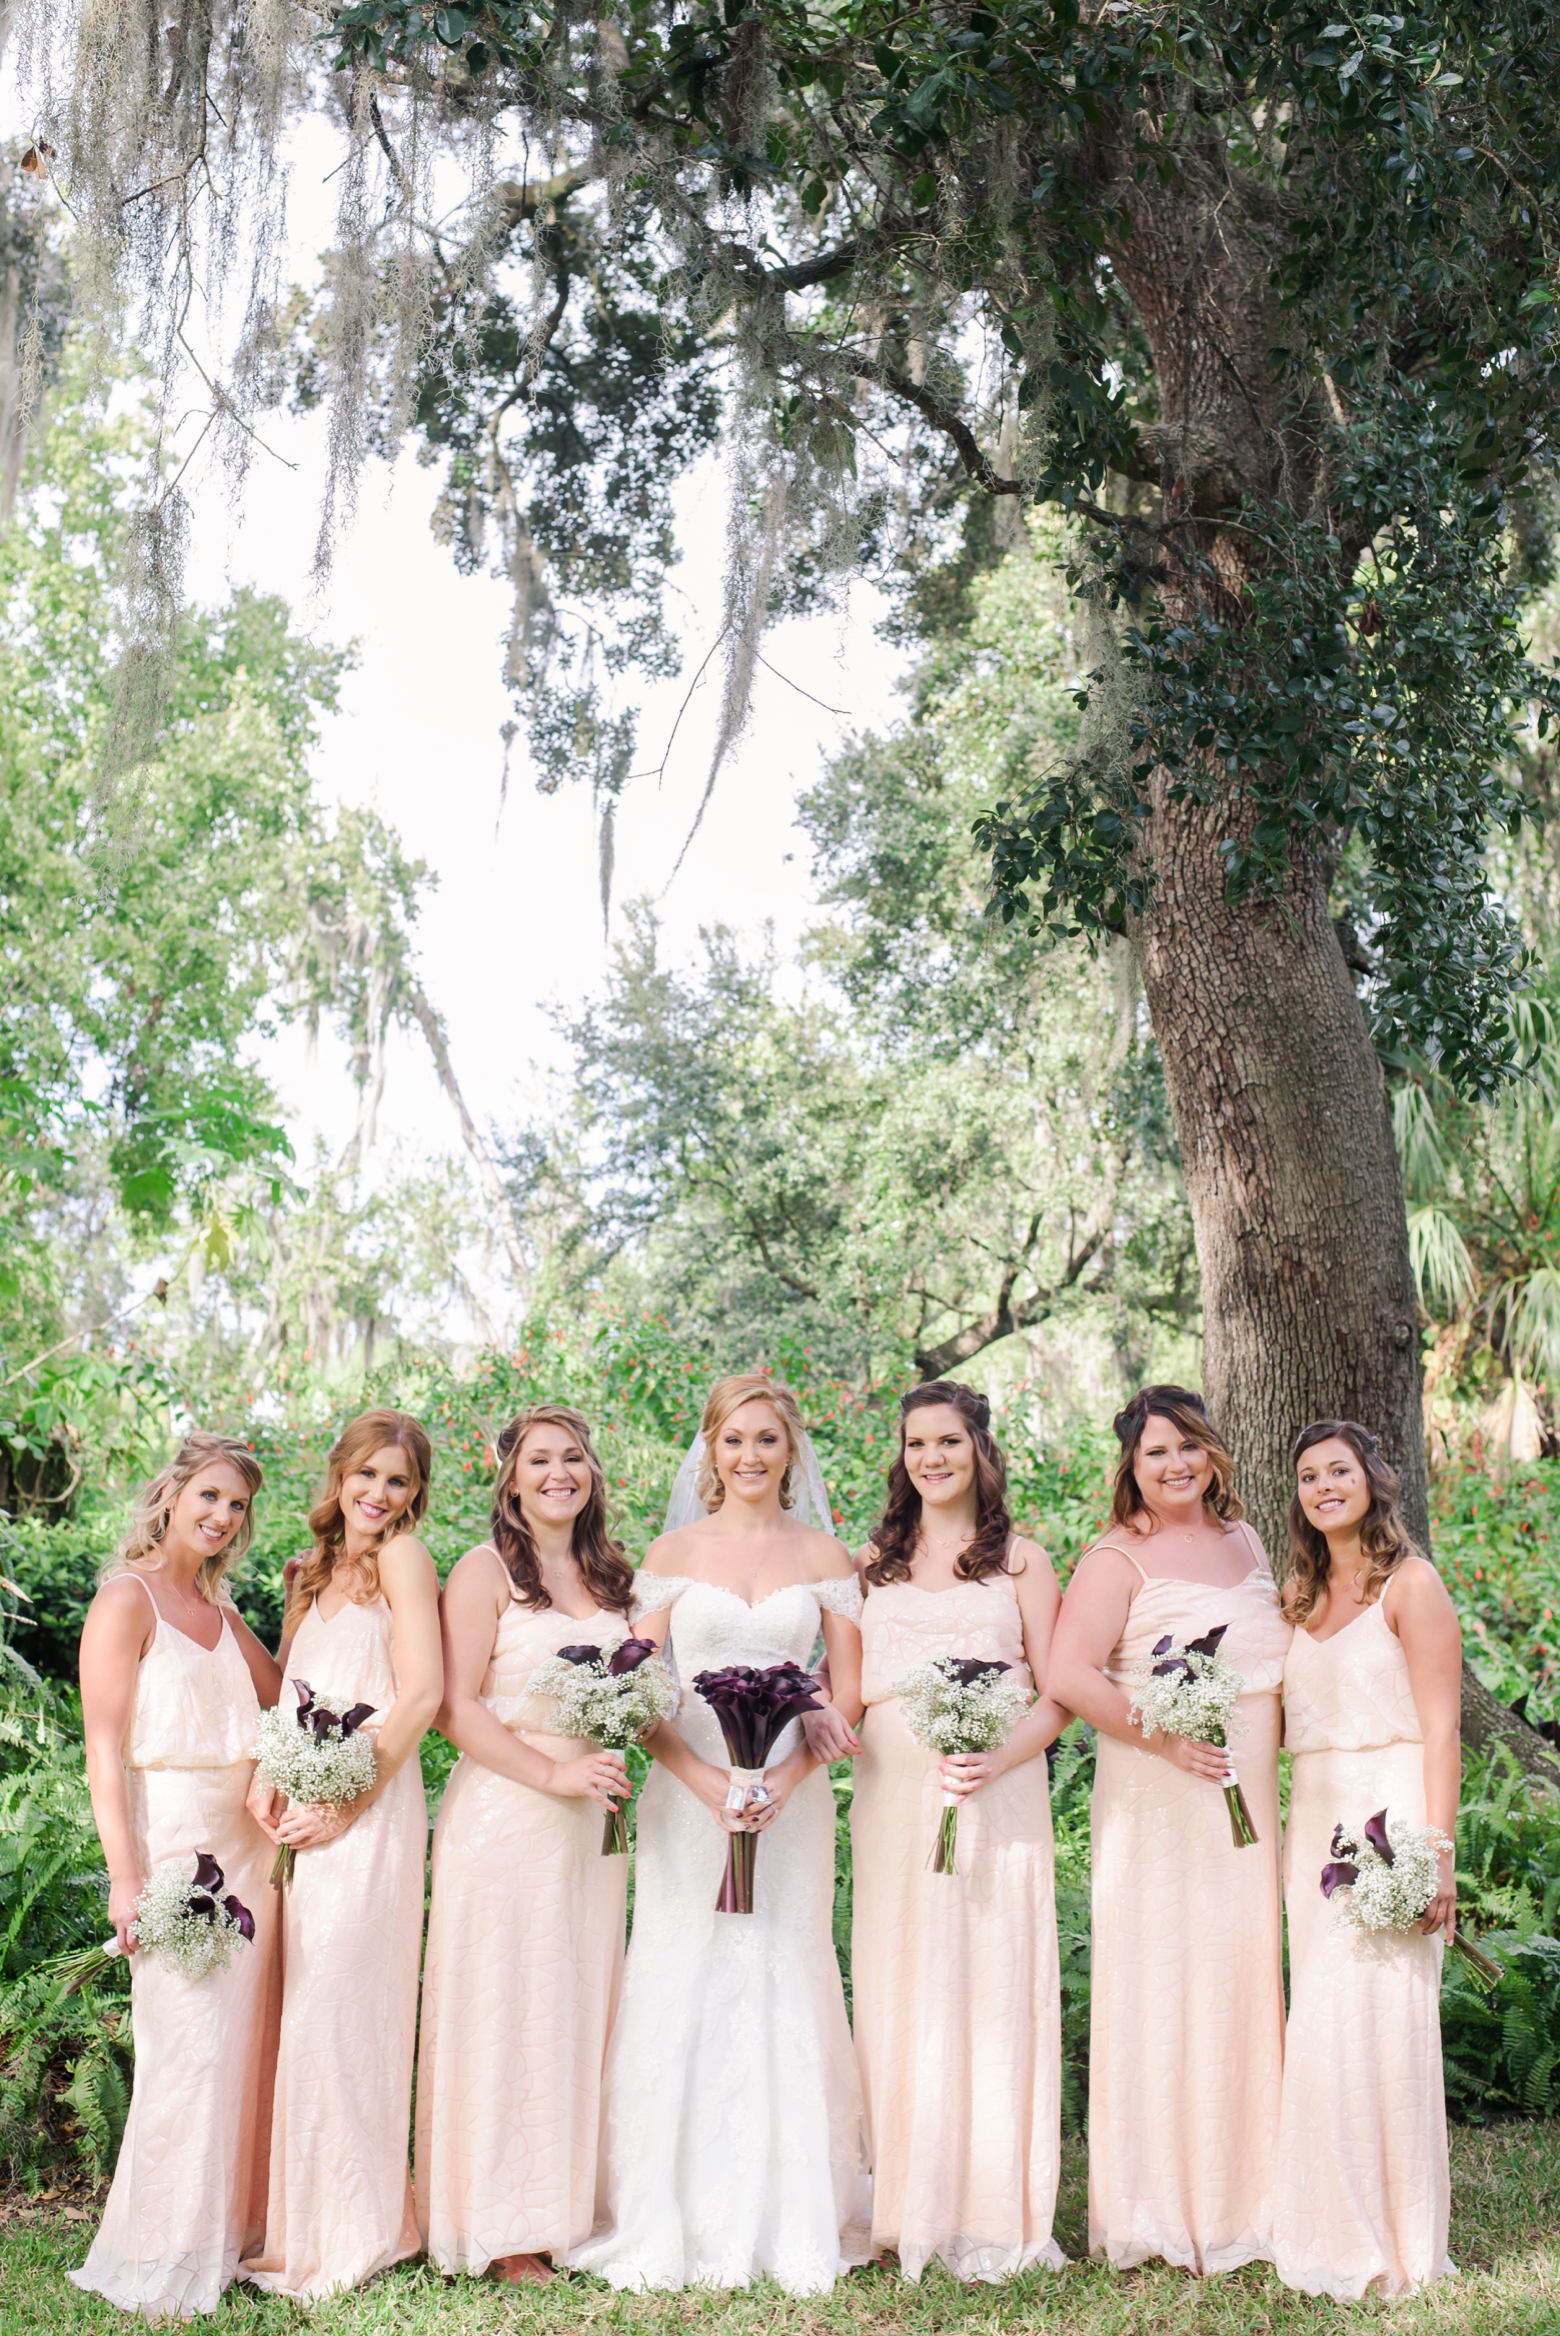 The Bride and her Bridesmaids pose holding their own floral bouquets